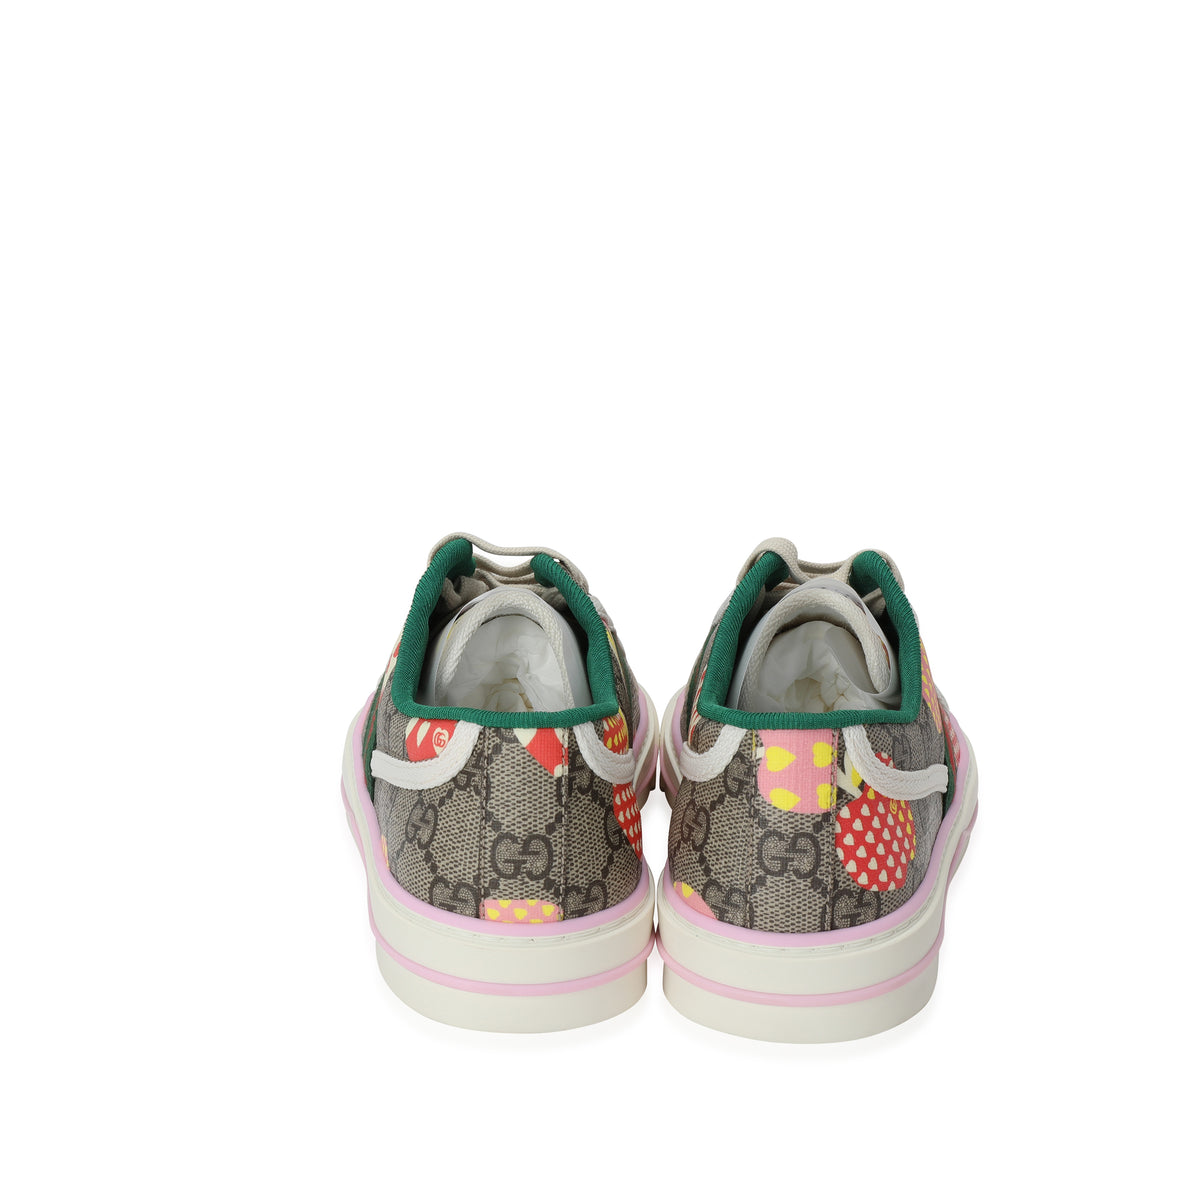 Gucci Tennis 1977 Crochet Sneakers in Pink - Gucci